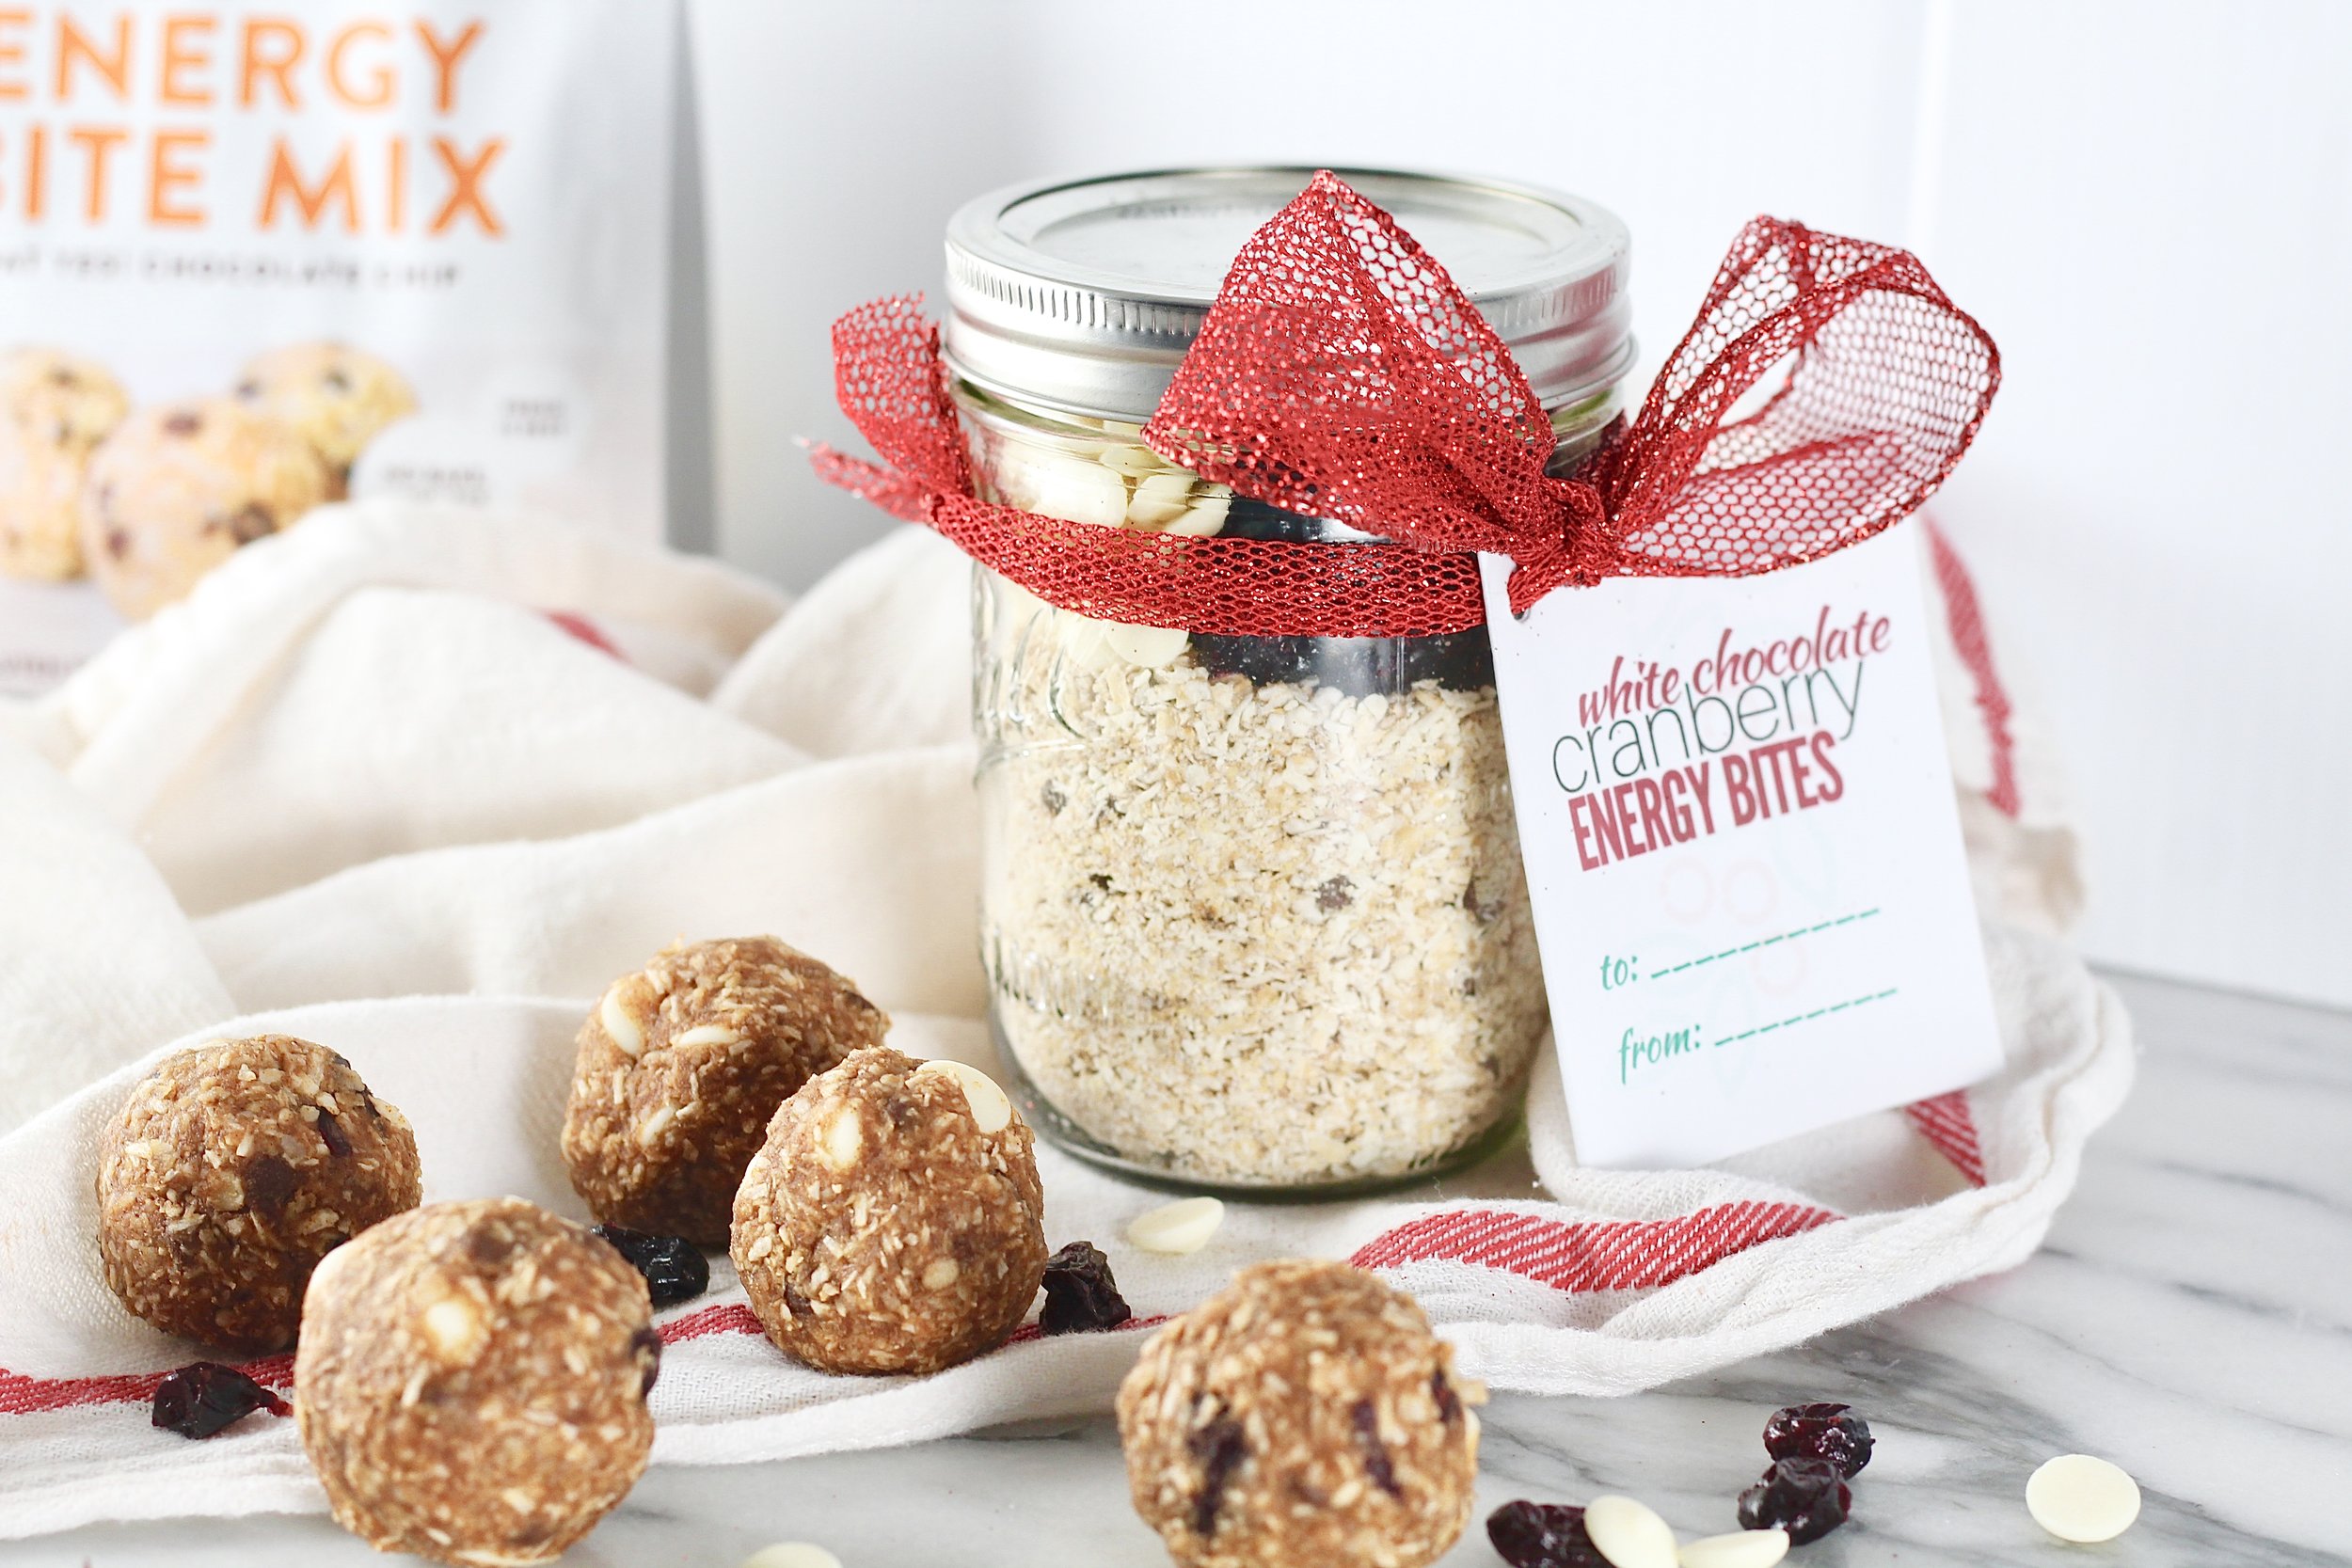 https://www.milkandhoneynutrition.com/wp-content/uploads/2020/02/DIY-Holiday-gifts-in-a-jar-Protein-balls-and-energy-bites-2.jpeg